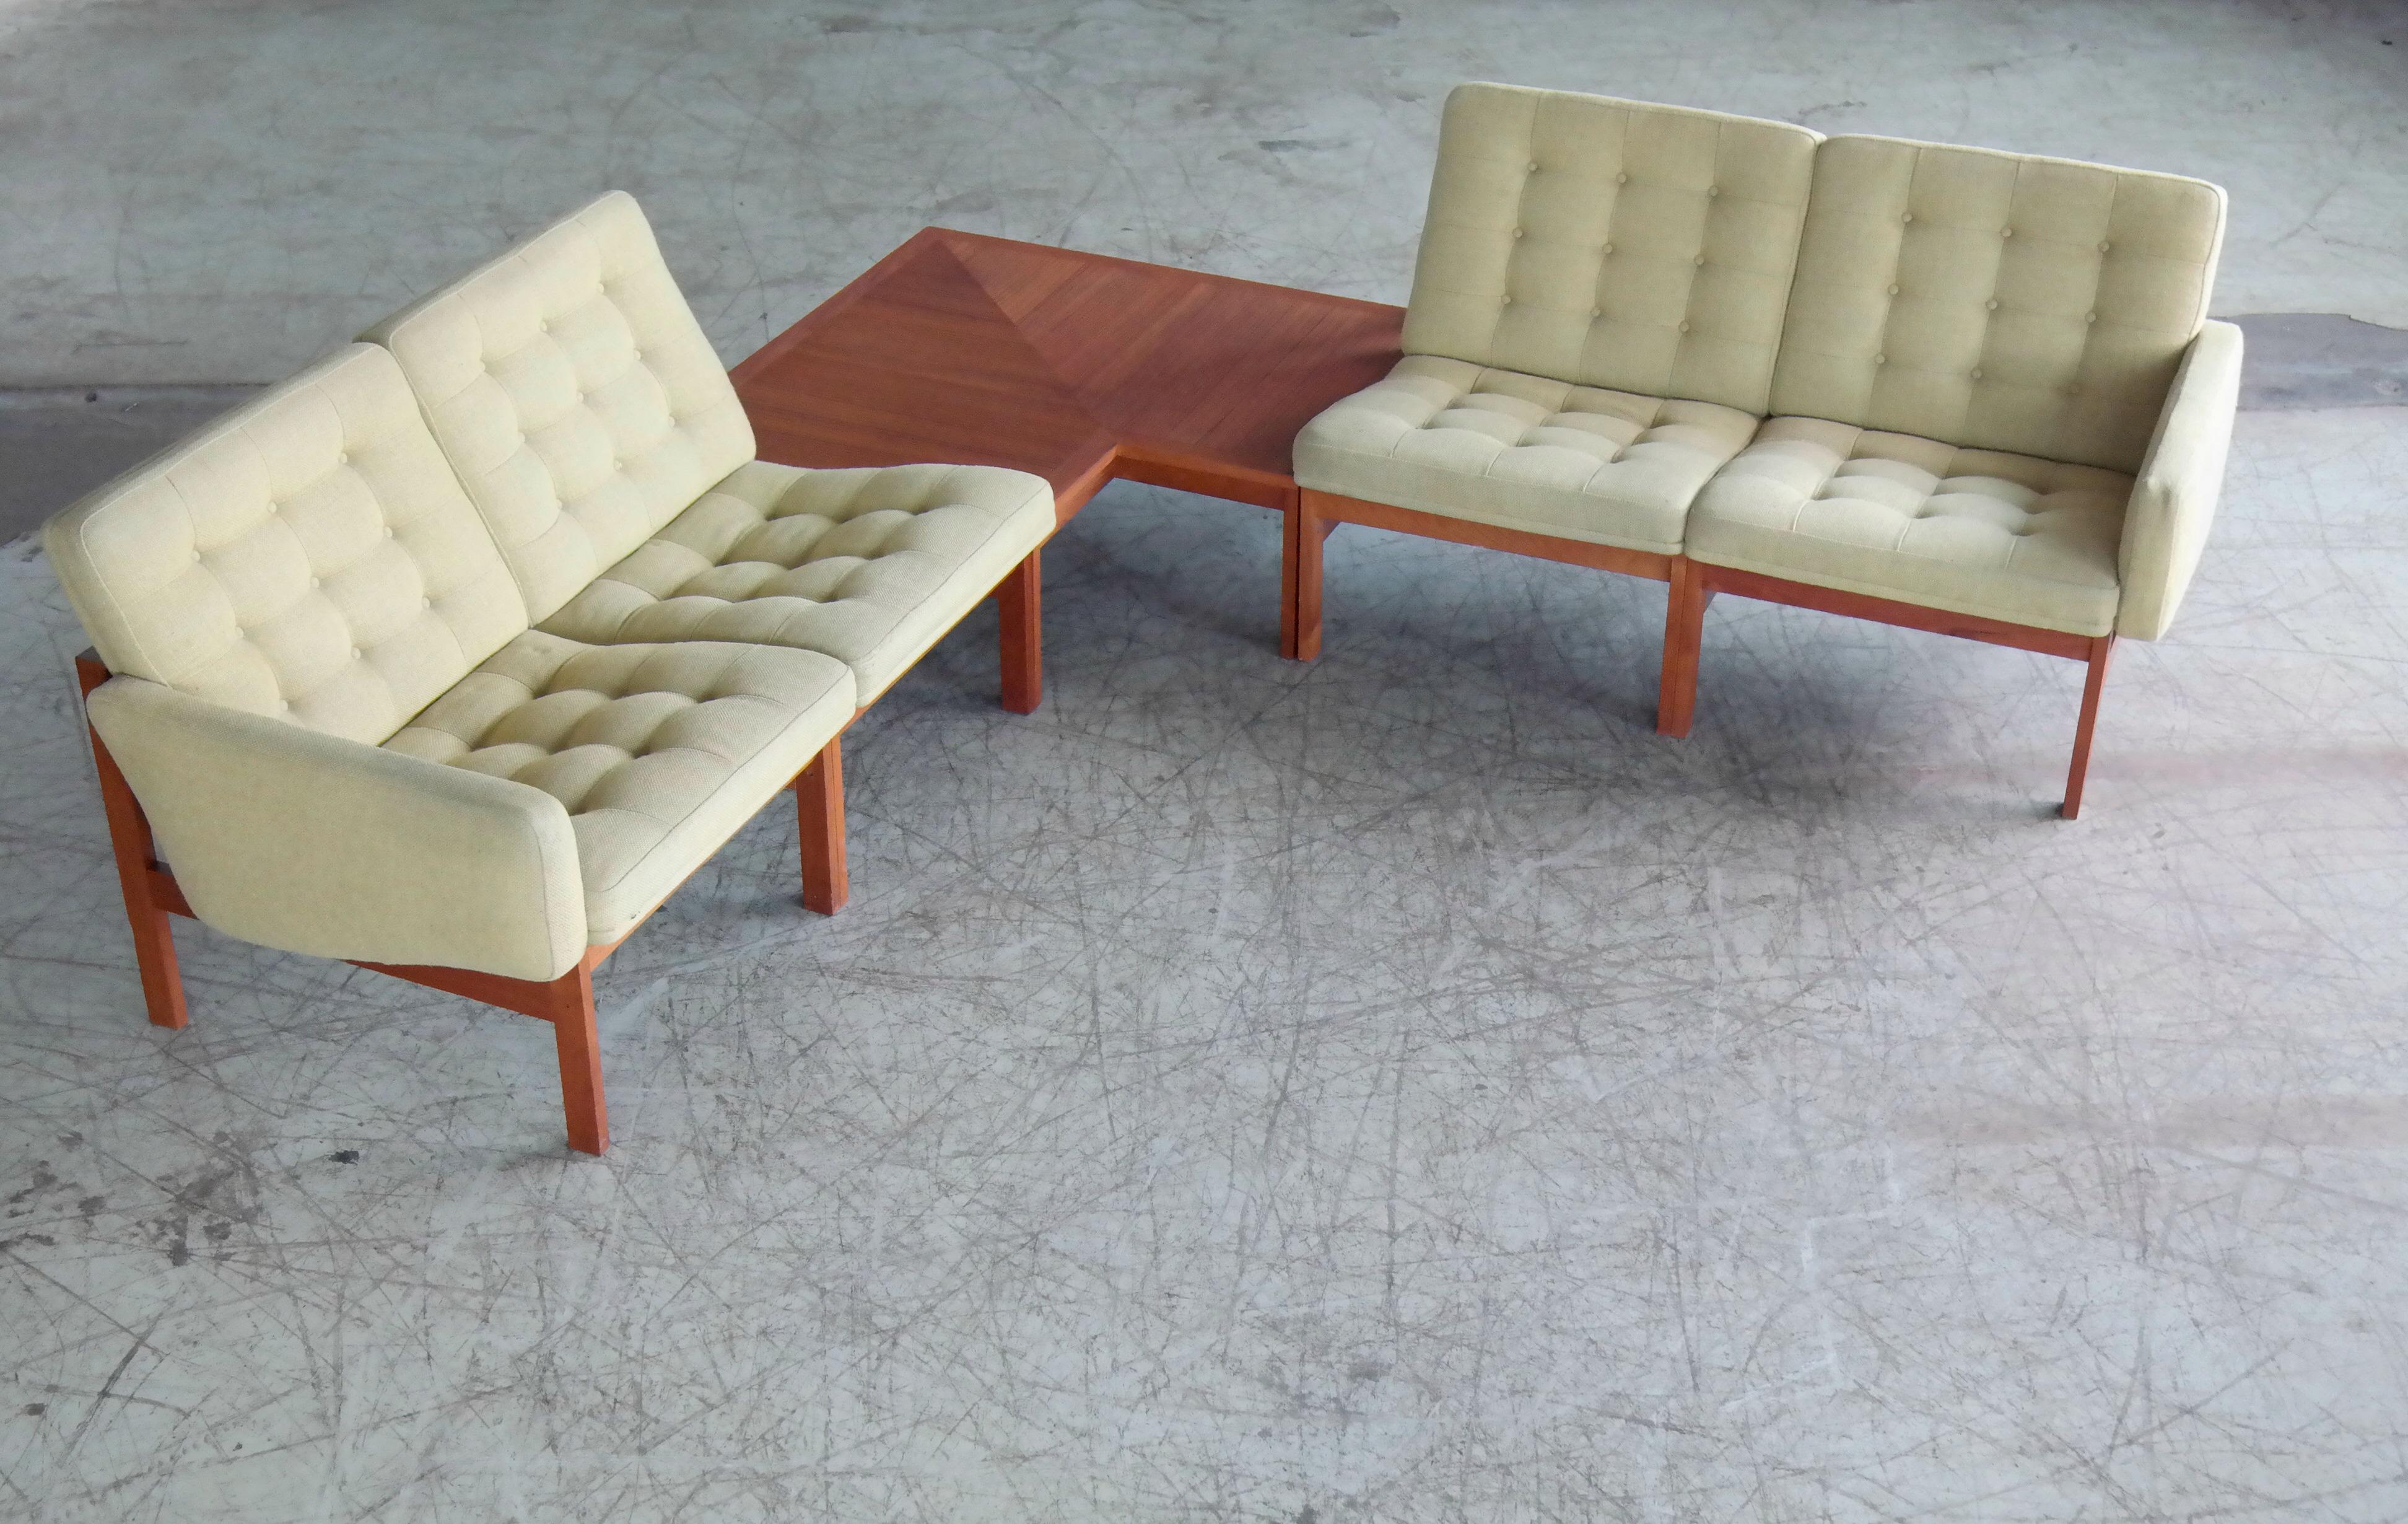 Beautiful and very stylish corner seating unit designed in the 1960s by Ole Gjerløv-Knudsen & Torben Lind for France & Son of Denmark. The seats are configured as modules and can be put together in various configurations. The frames are made from